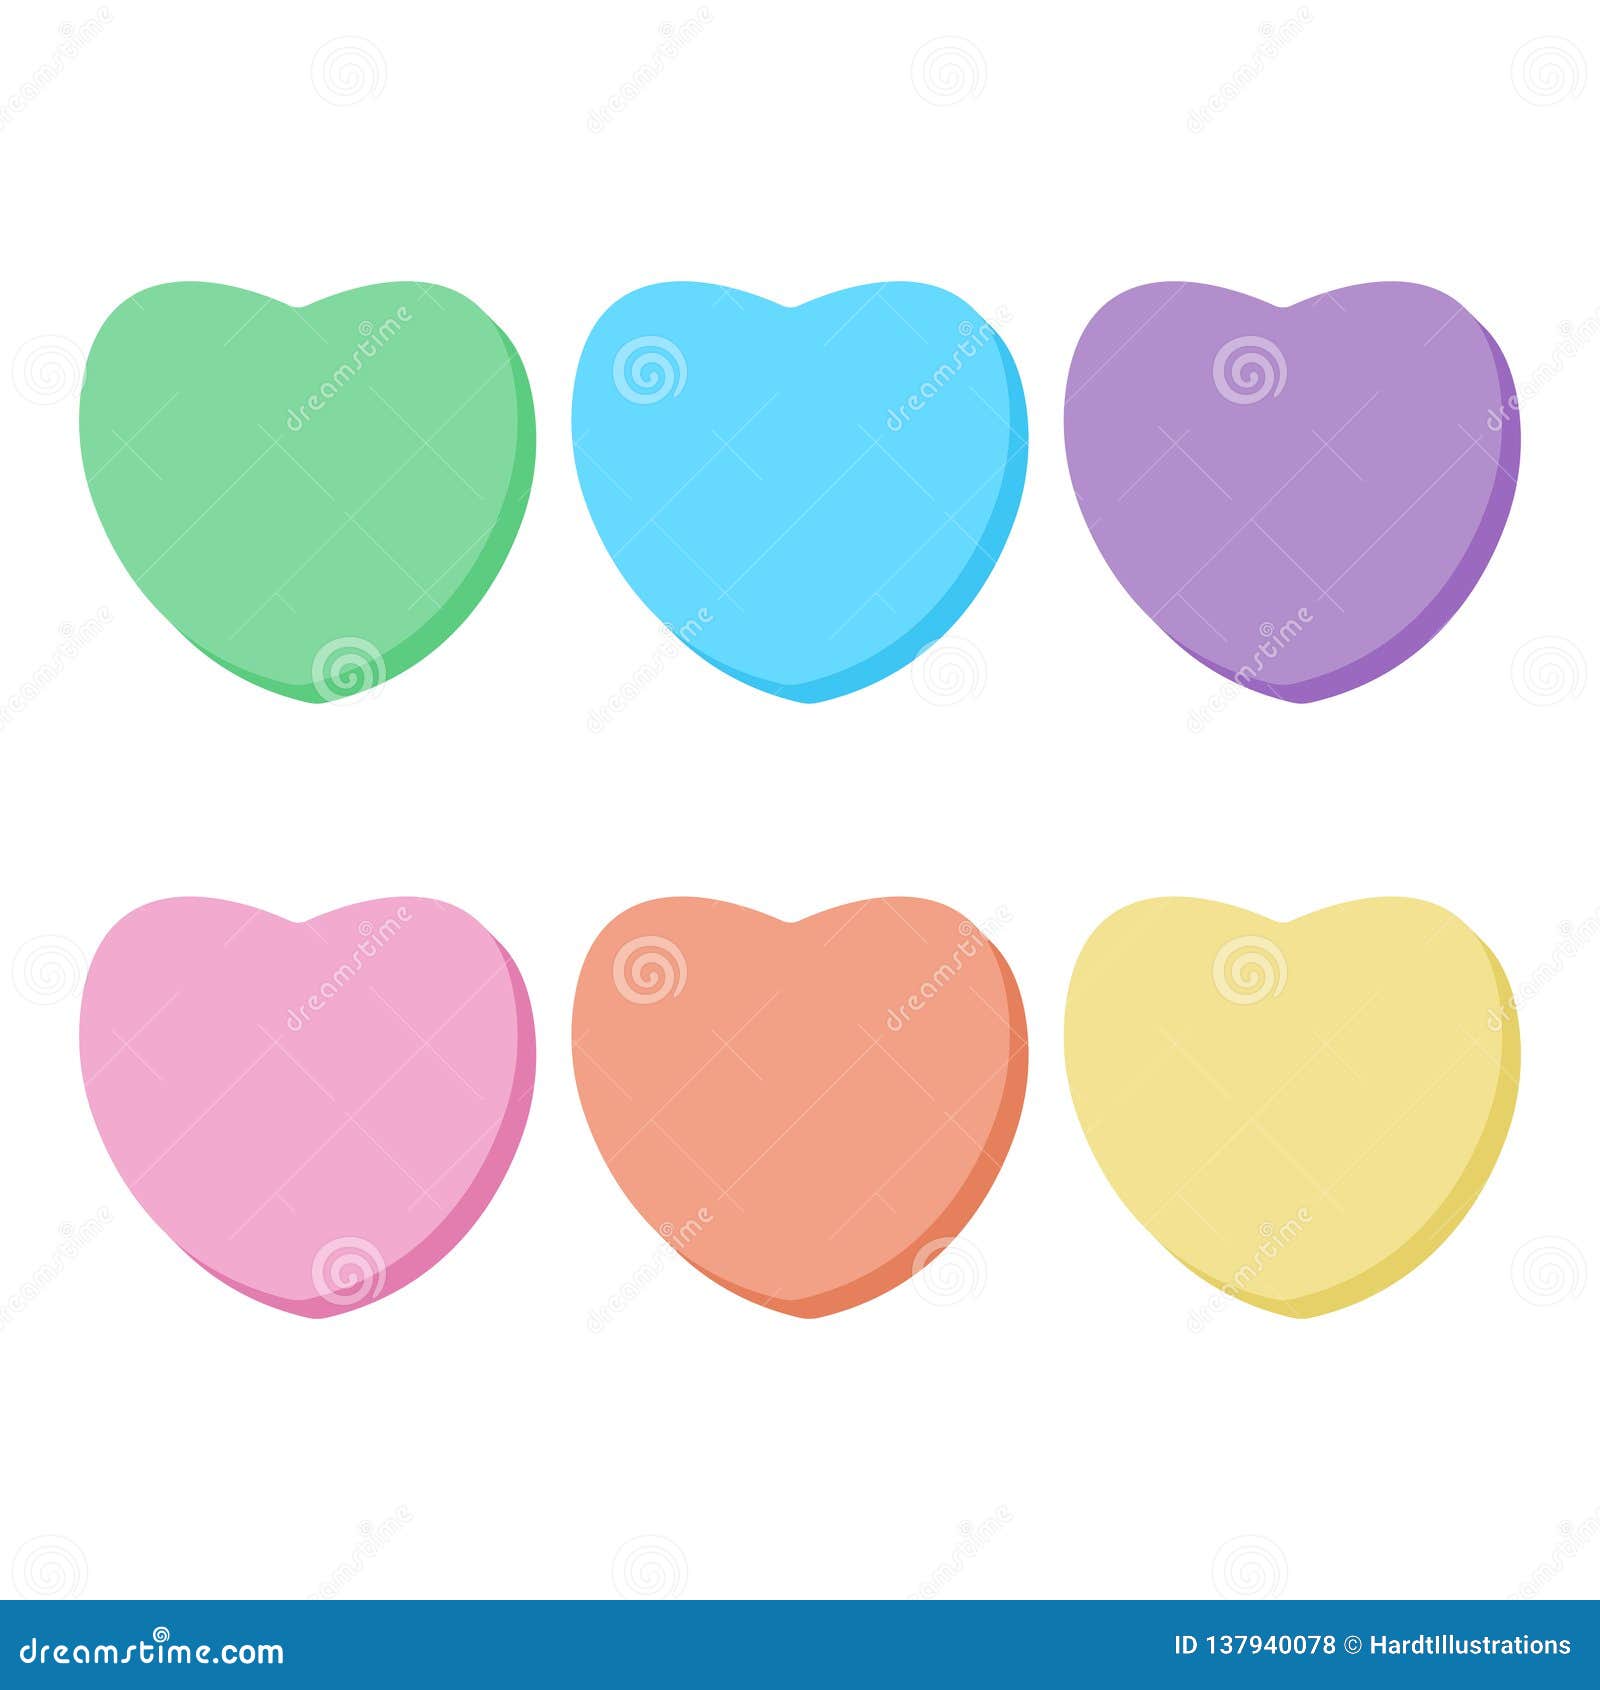 rainbow candy hearts collection